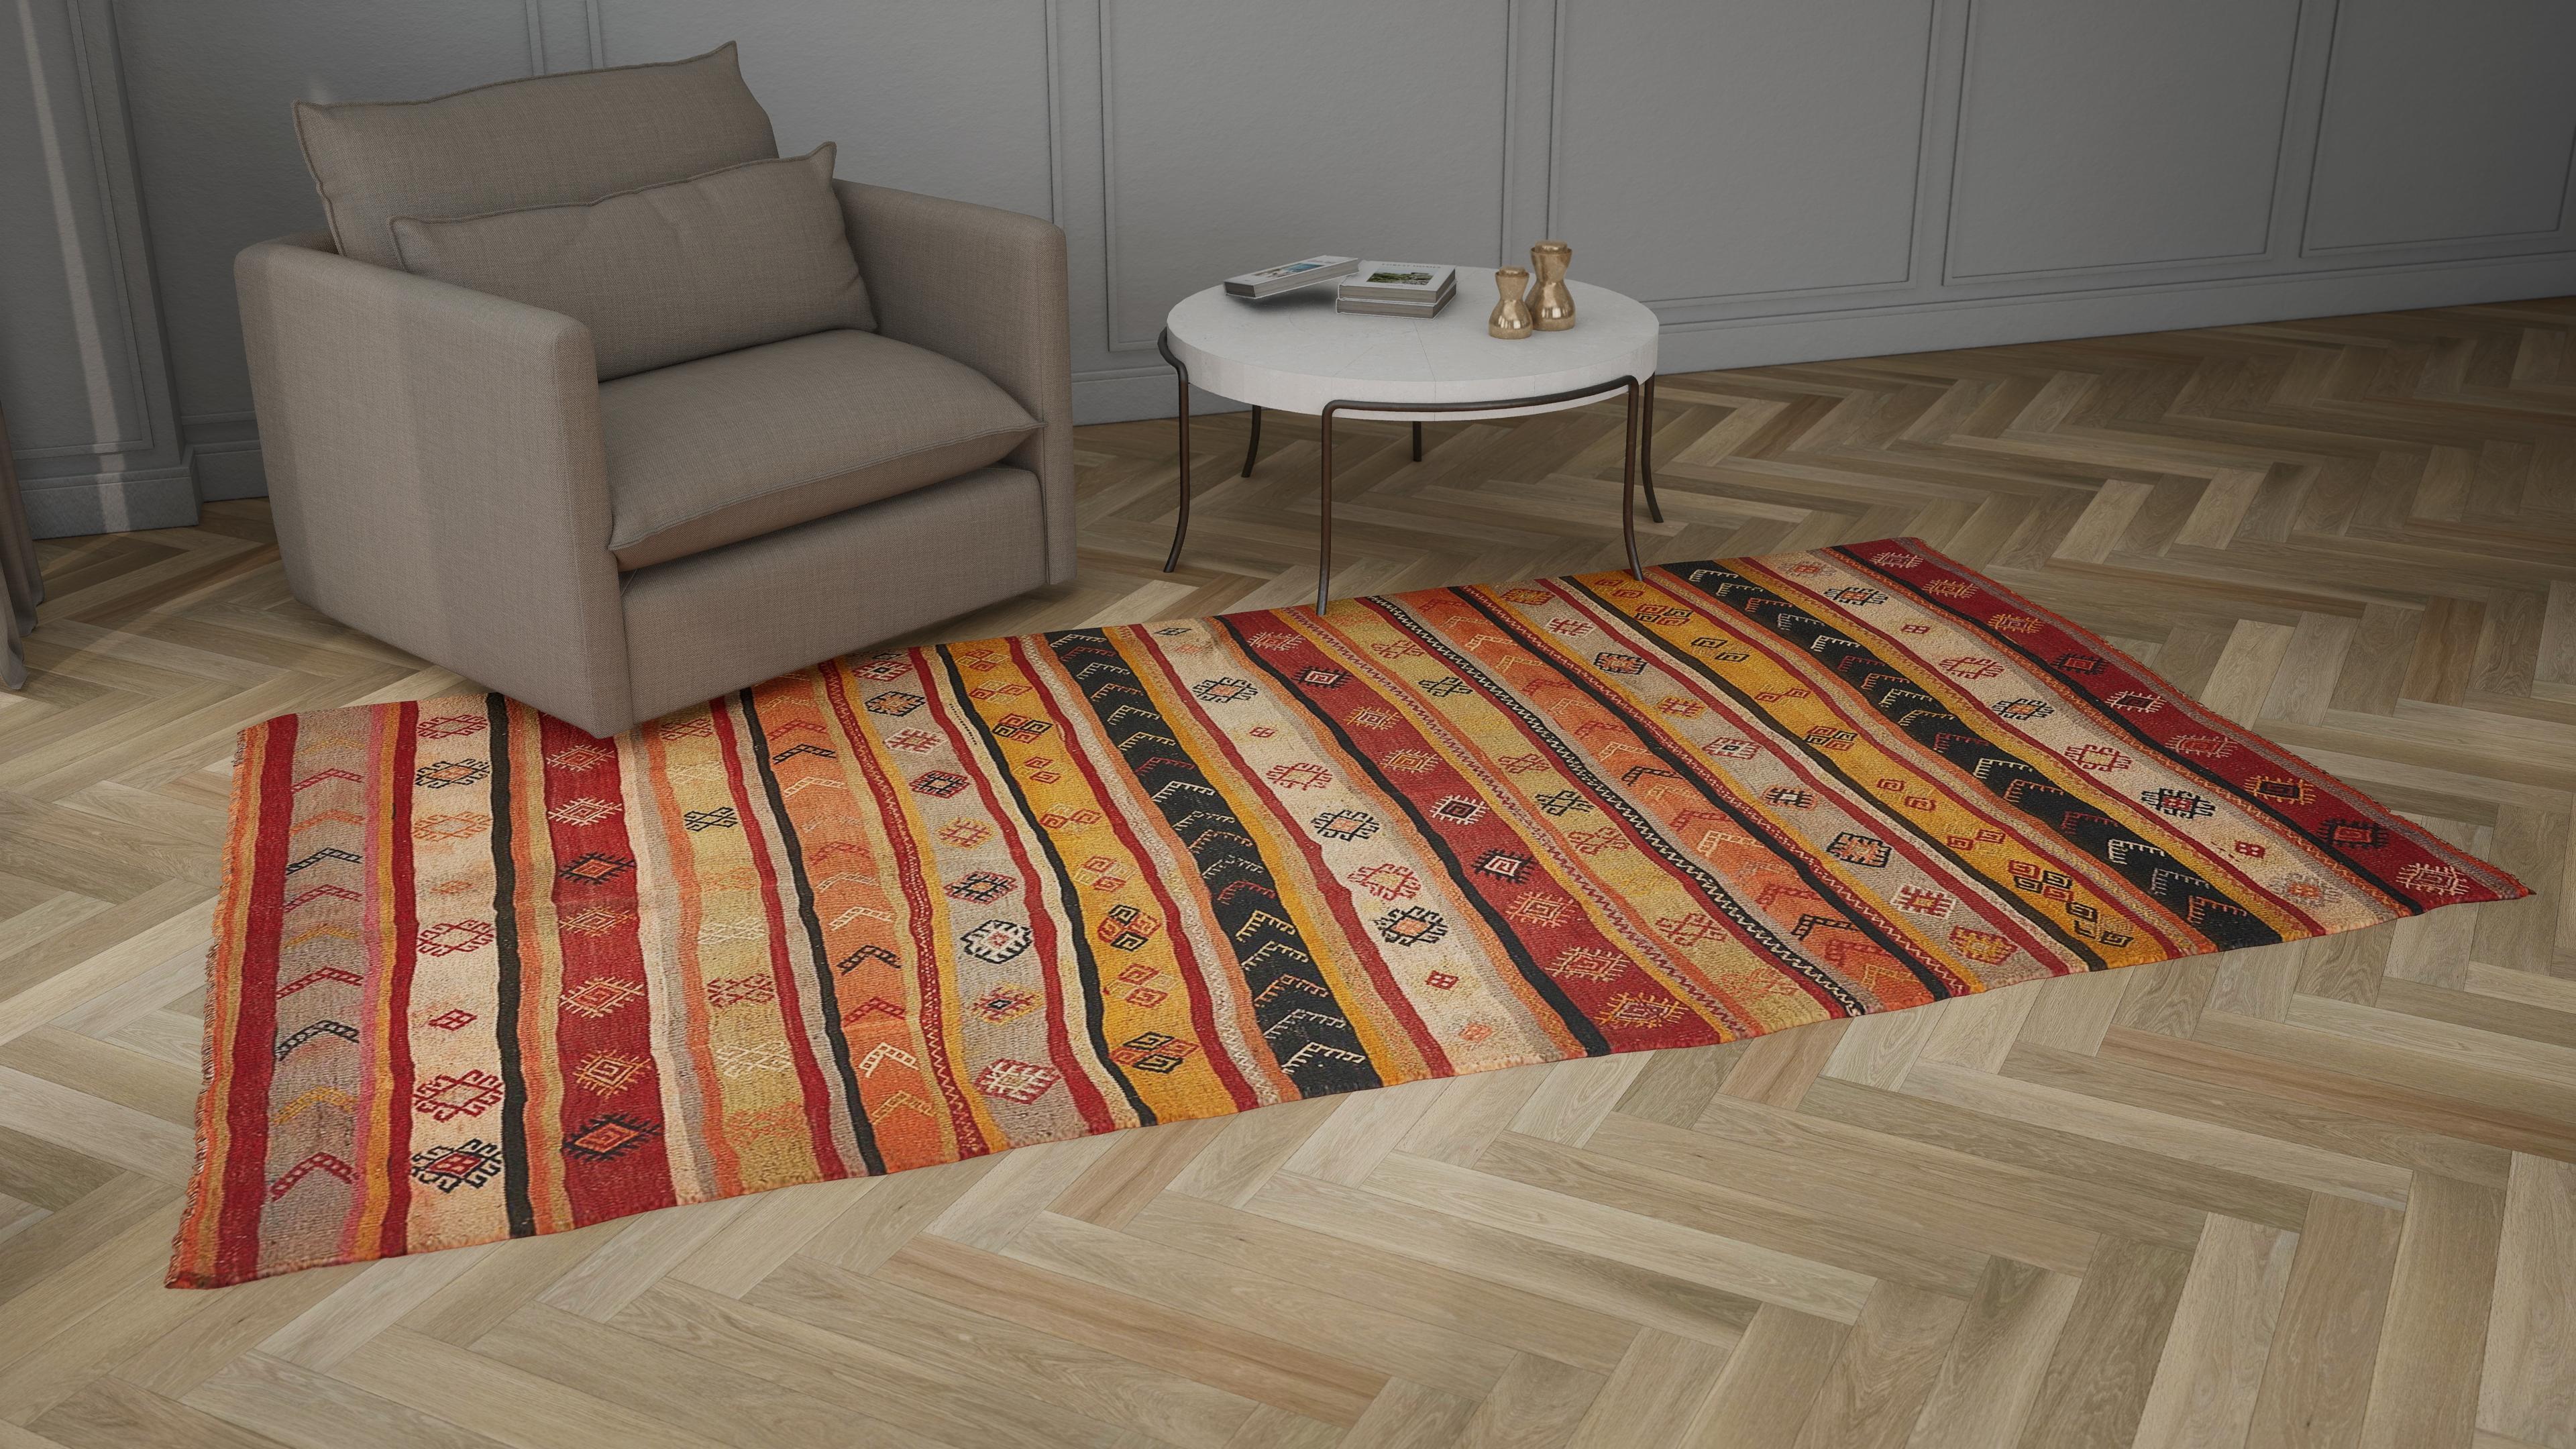 Loved for their versatility and durability, our collection of flatweave Kilim rugs was sourced from around the world. Each piece was handmade with interweaving fibers and colors for rich texture and dimension.